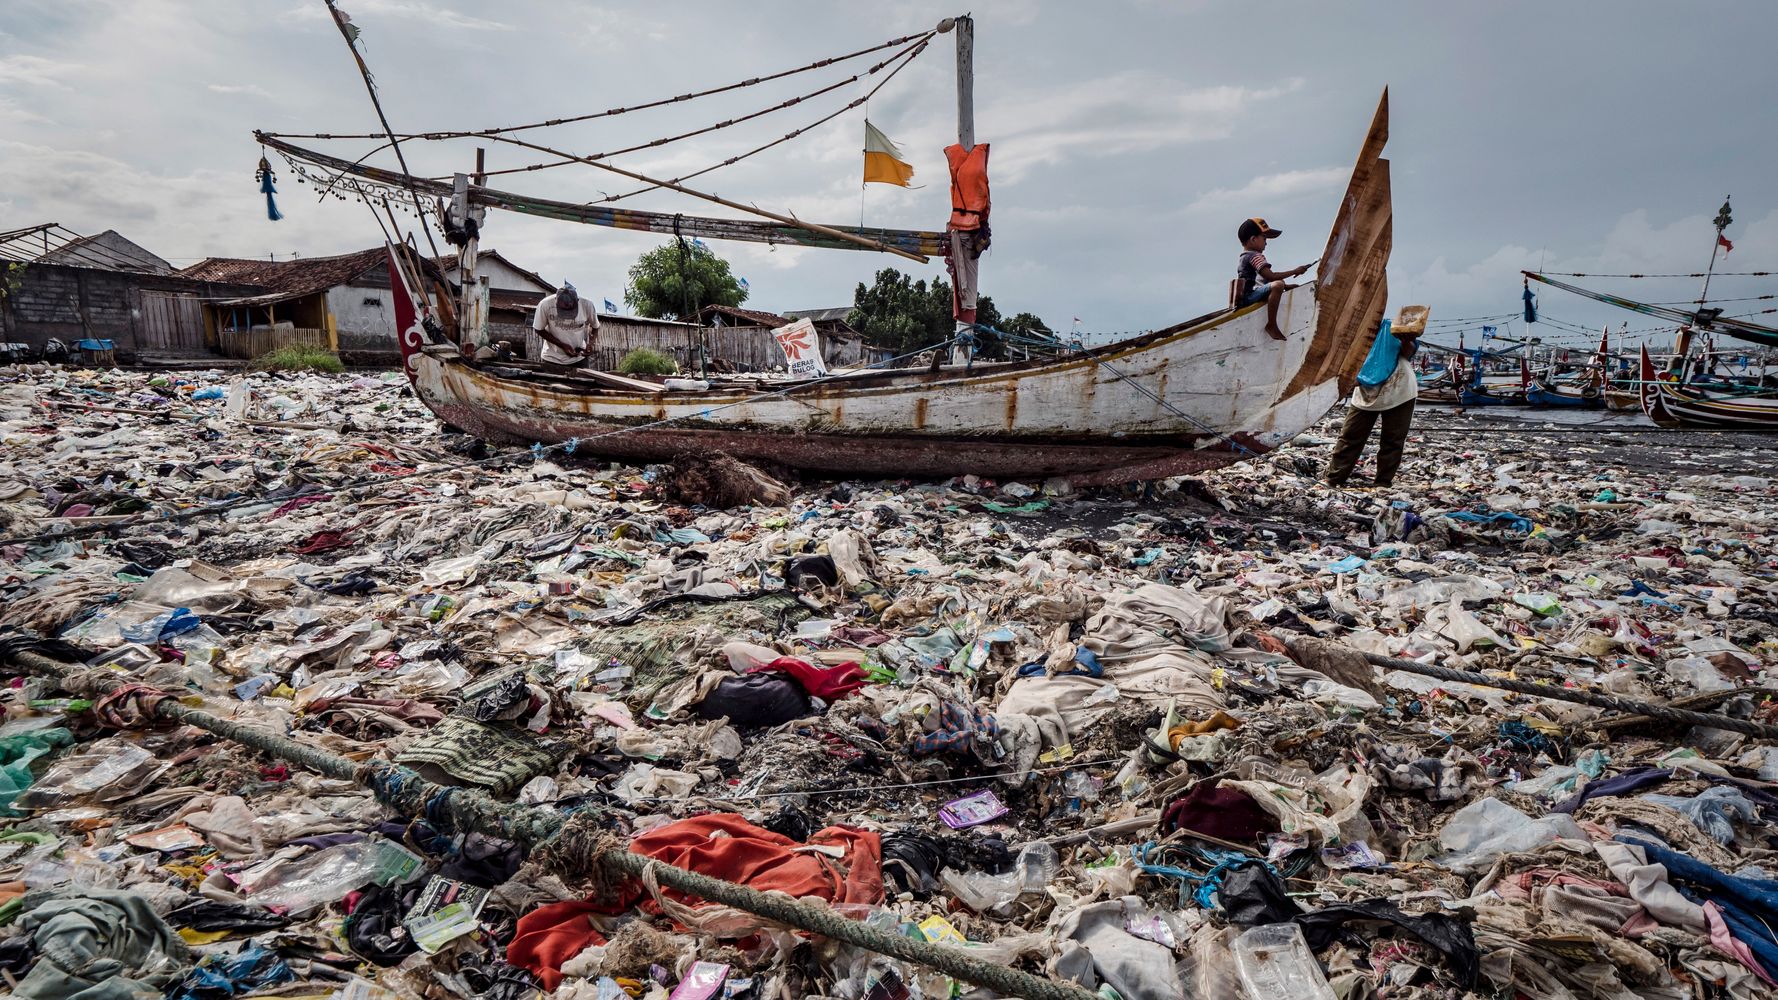 How A Picturesque Fishing Town Became Smothered In Trash